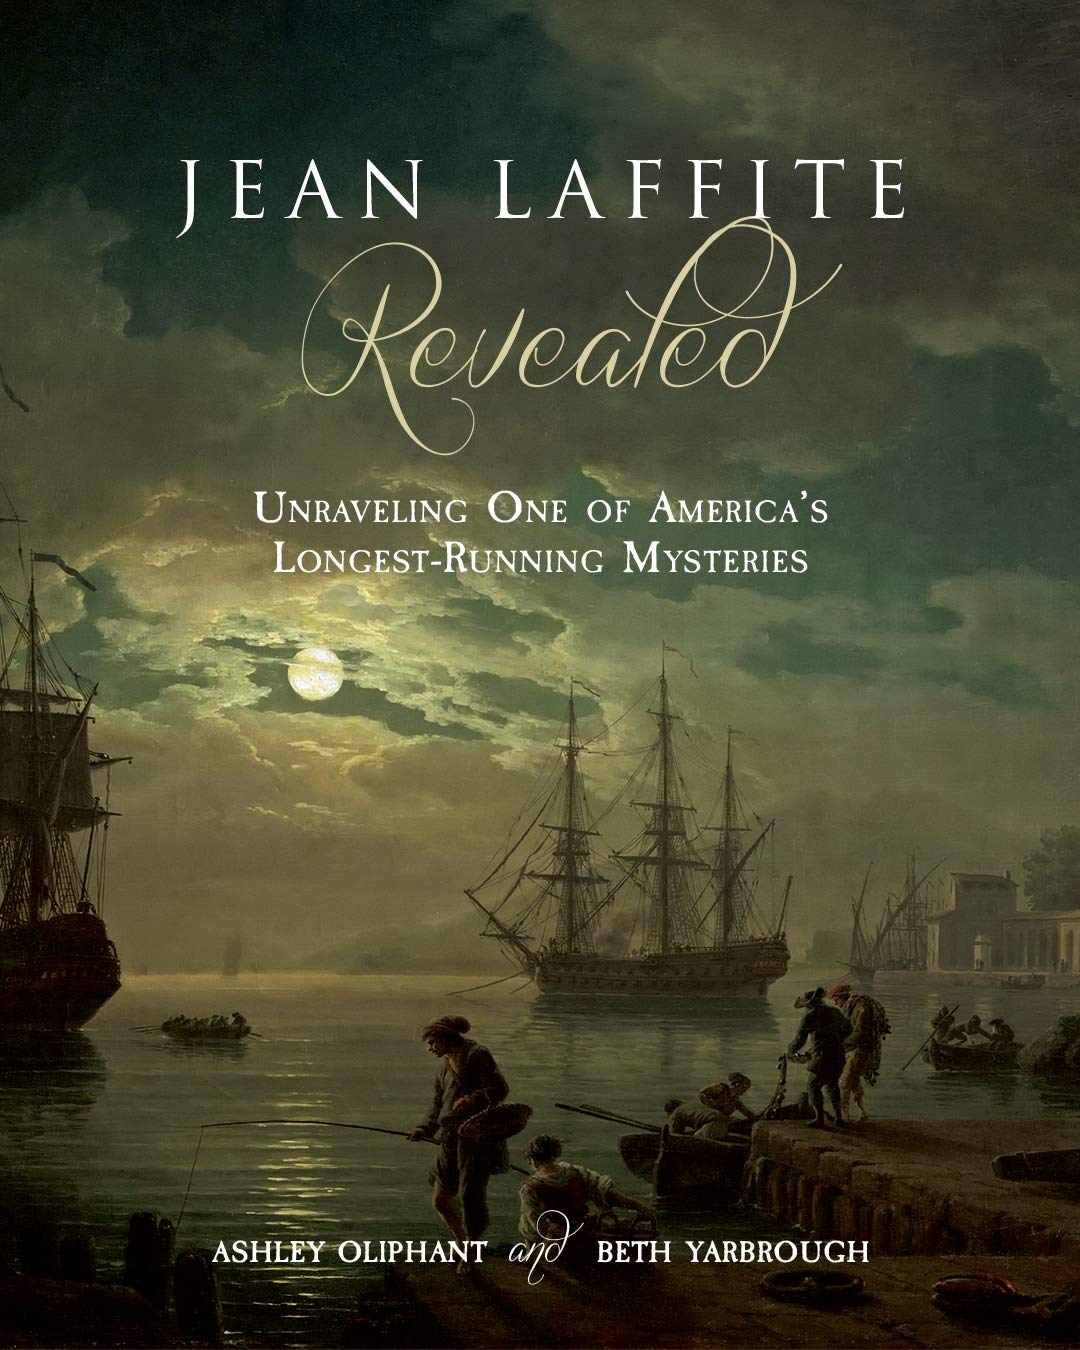 Jean Laffite Revealed: Unraveling One of America's Longest-Running Mysteries